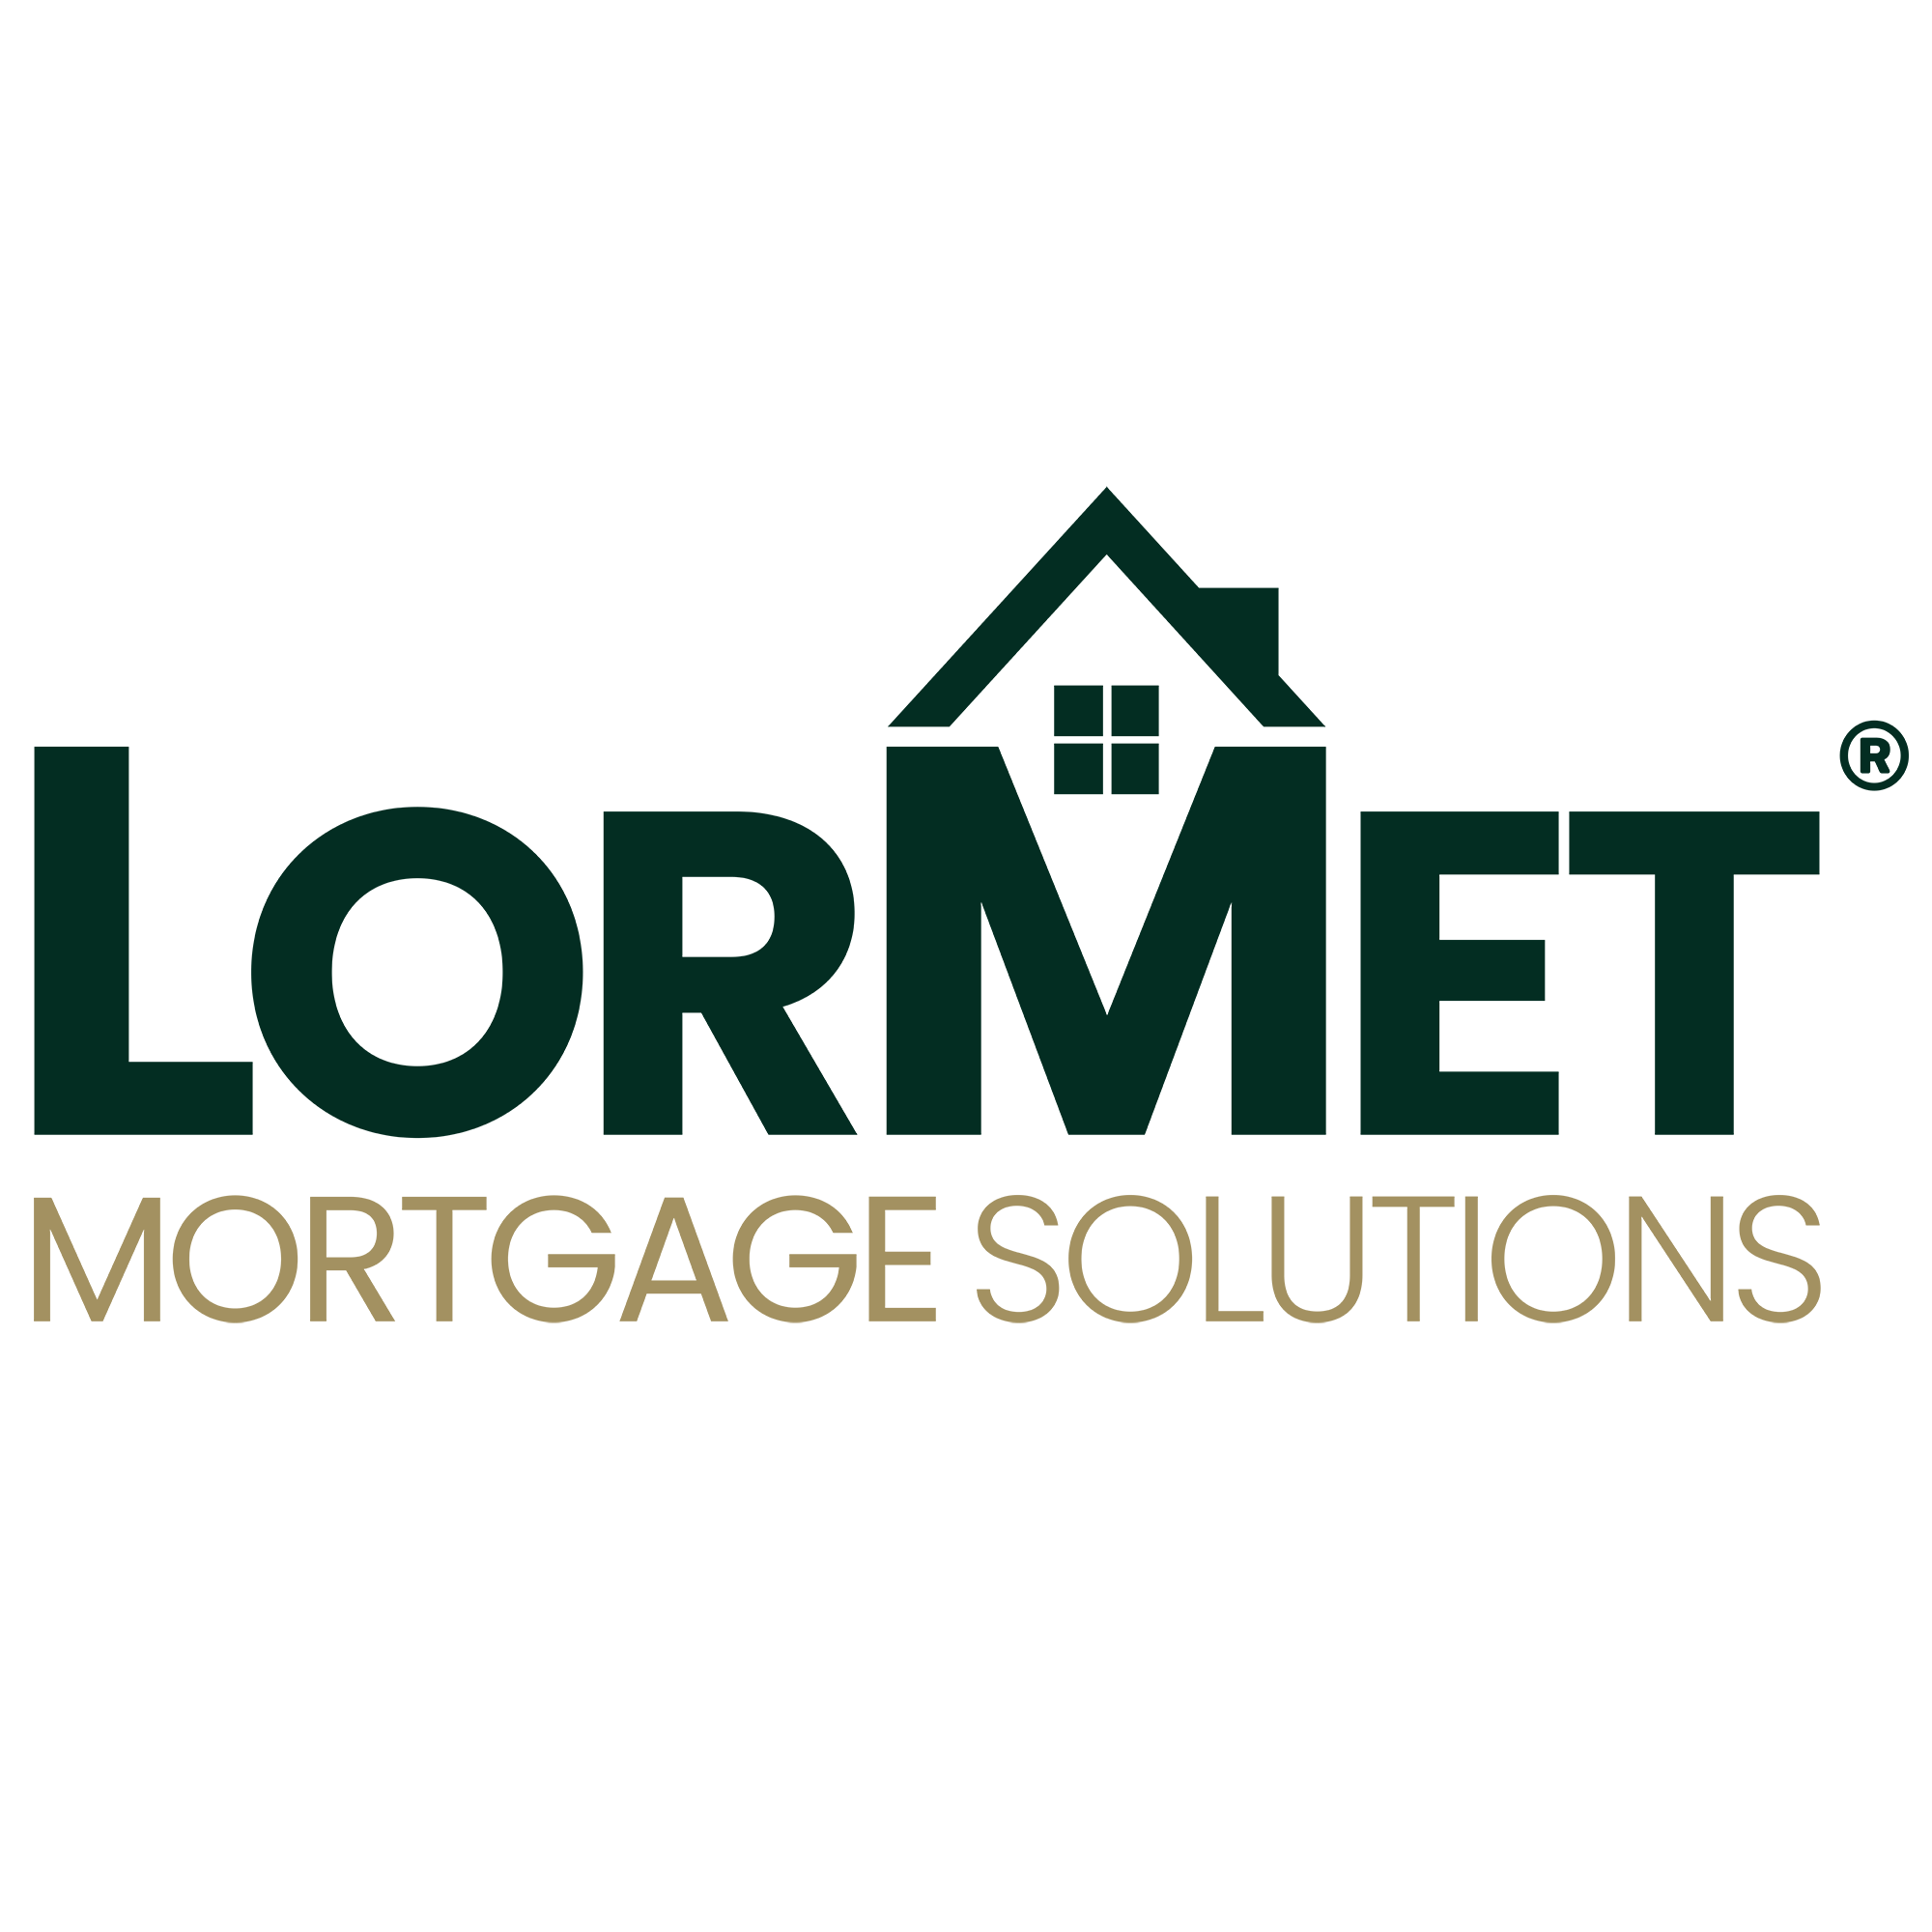 LorMet Mortgage Solutions Logo w Trademark Square